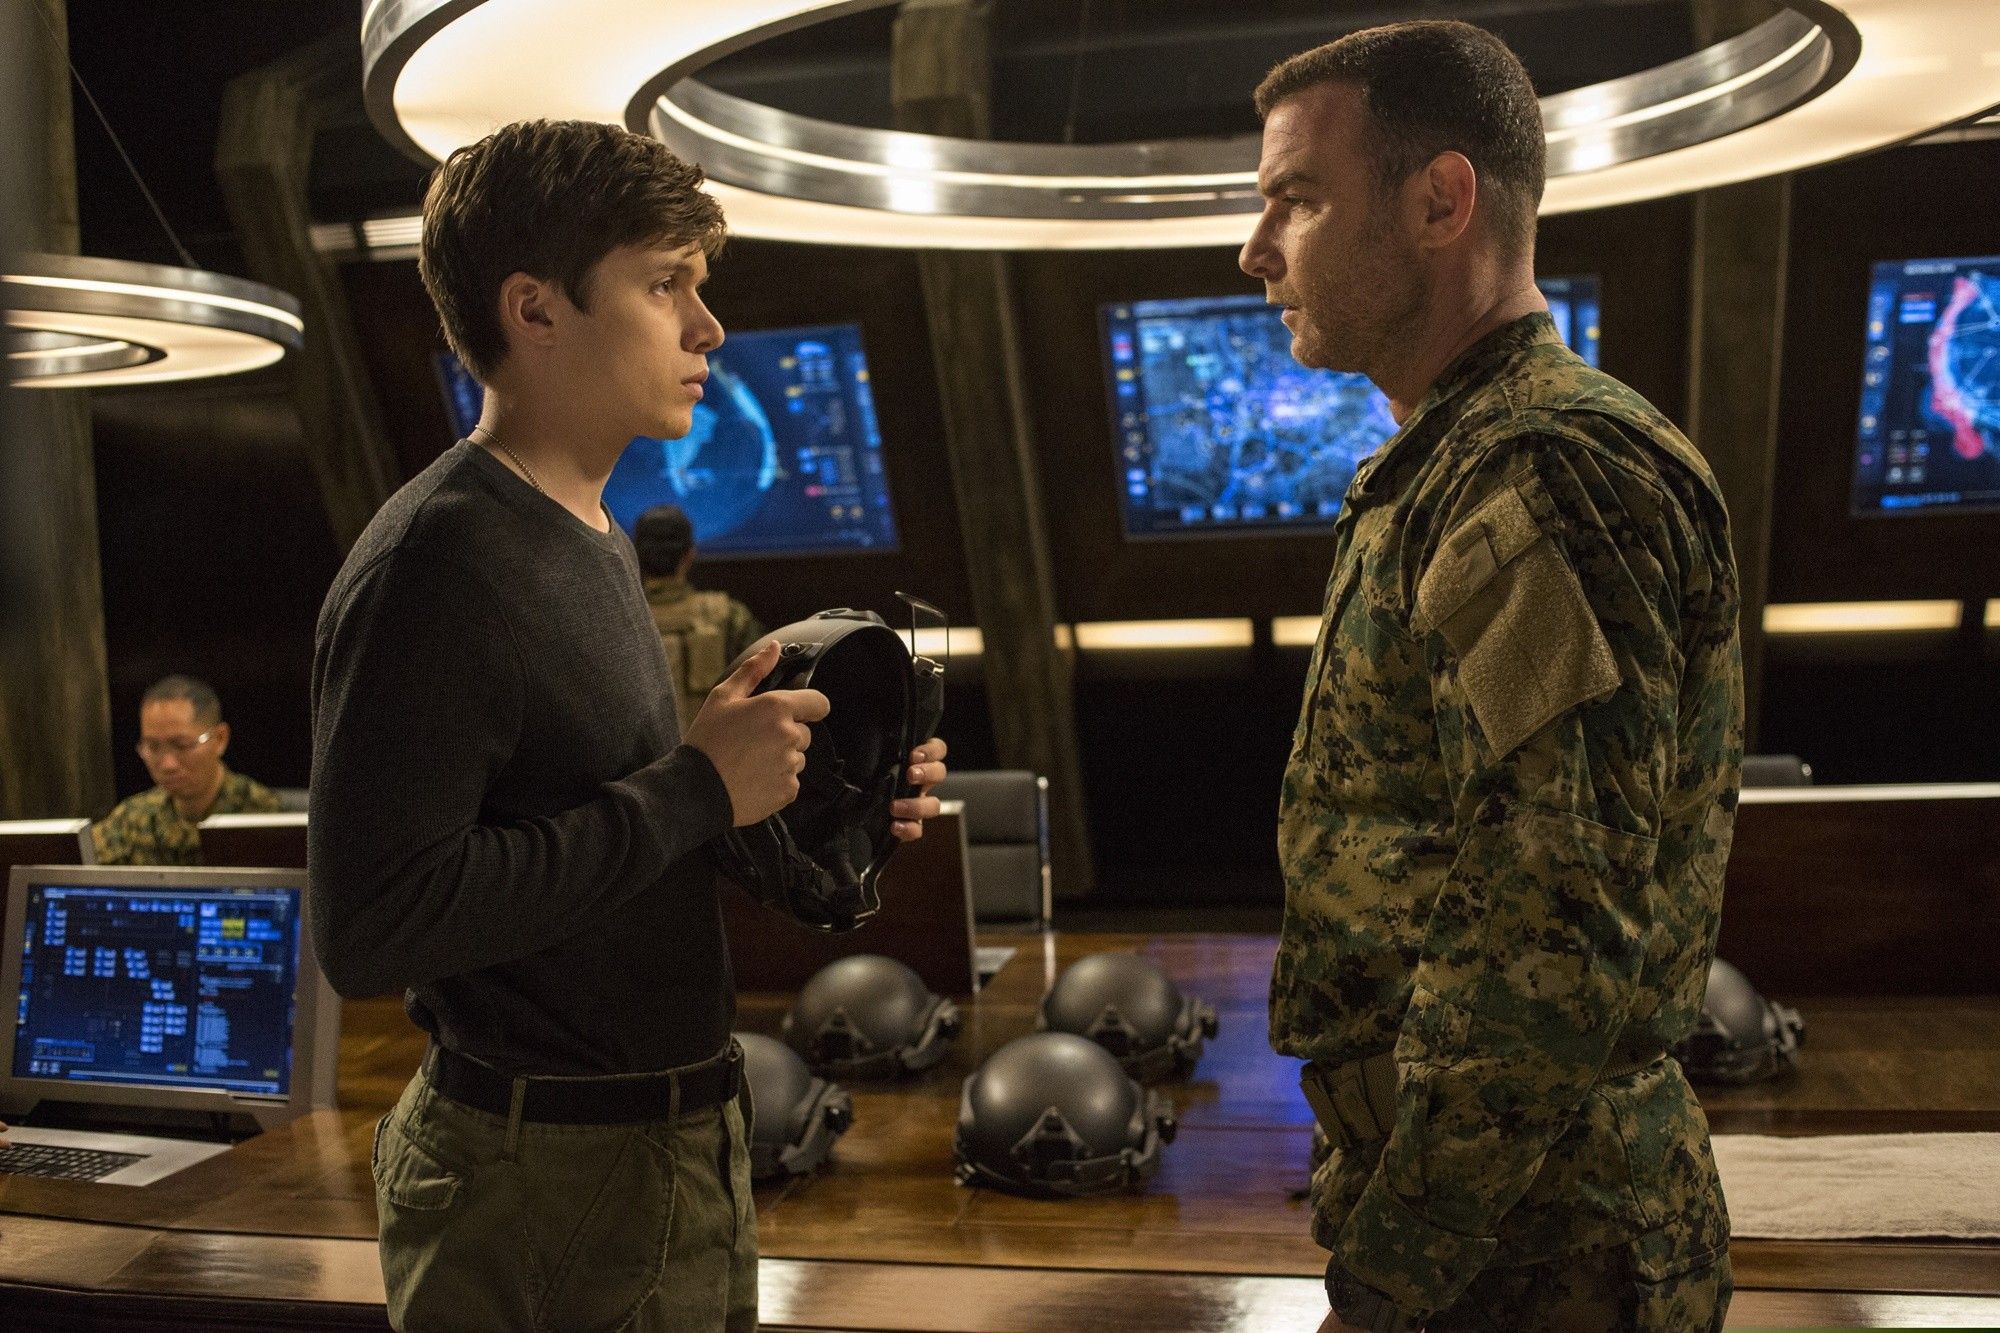 Nick Robinson stars as Ben Parish and Liev Schreiber stars as Colonel Vosch in Columbia Pictures' The 5th Wave (2016)